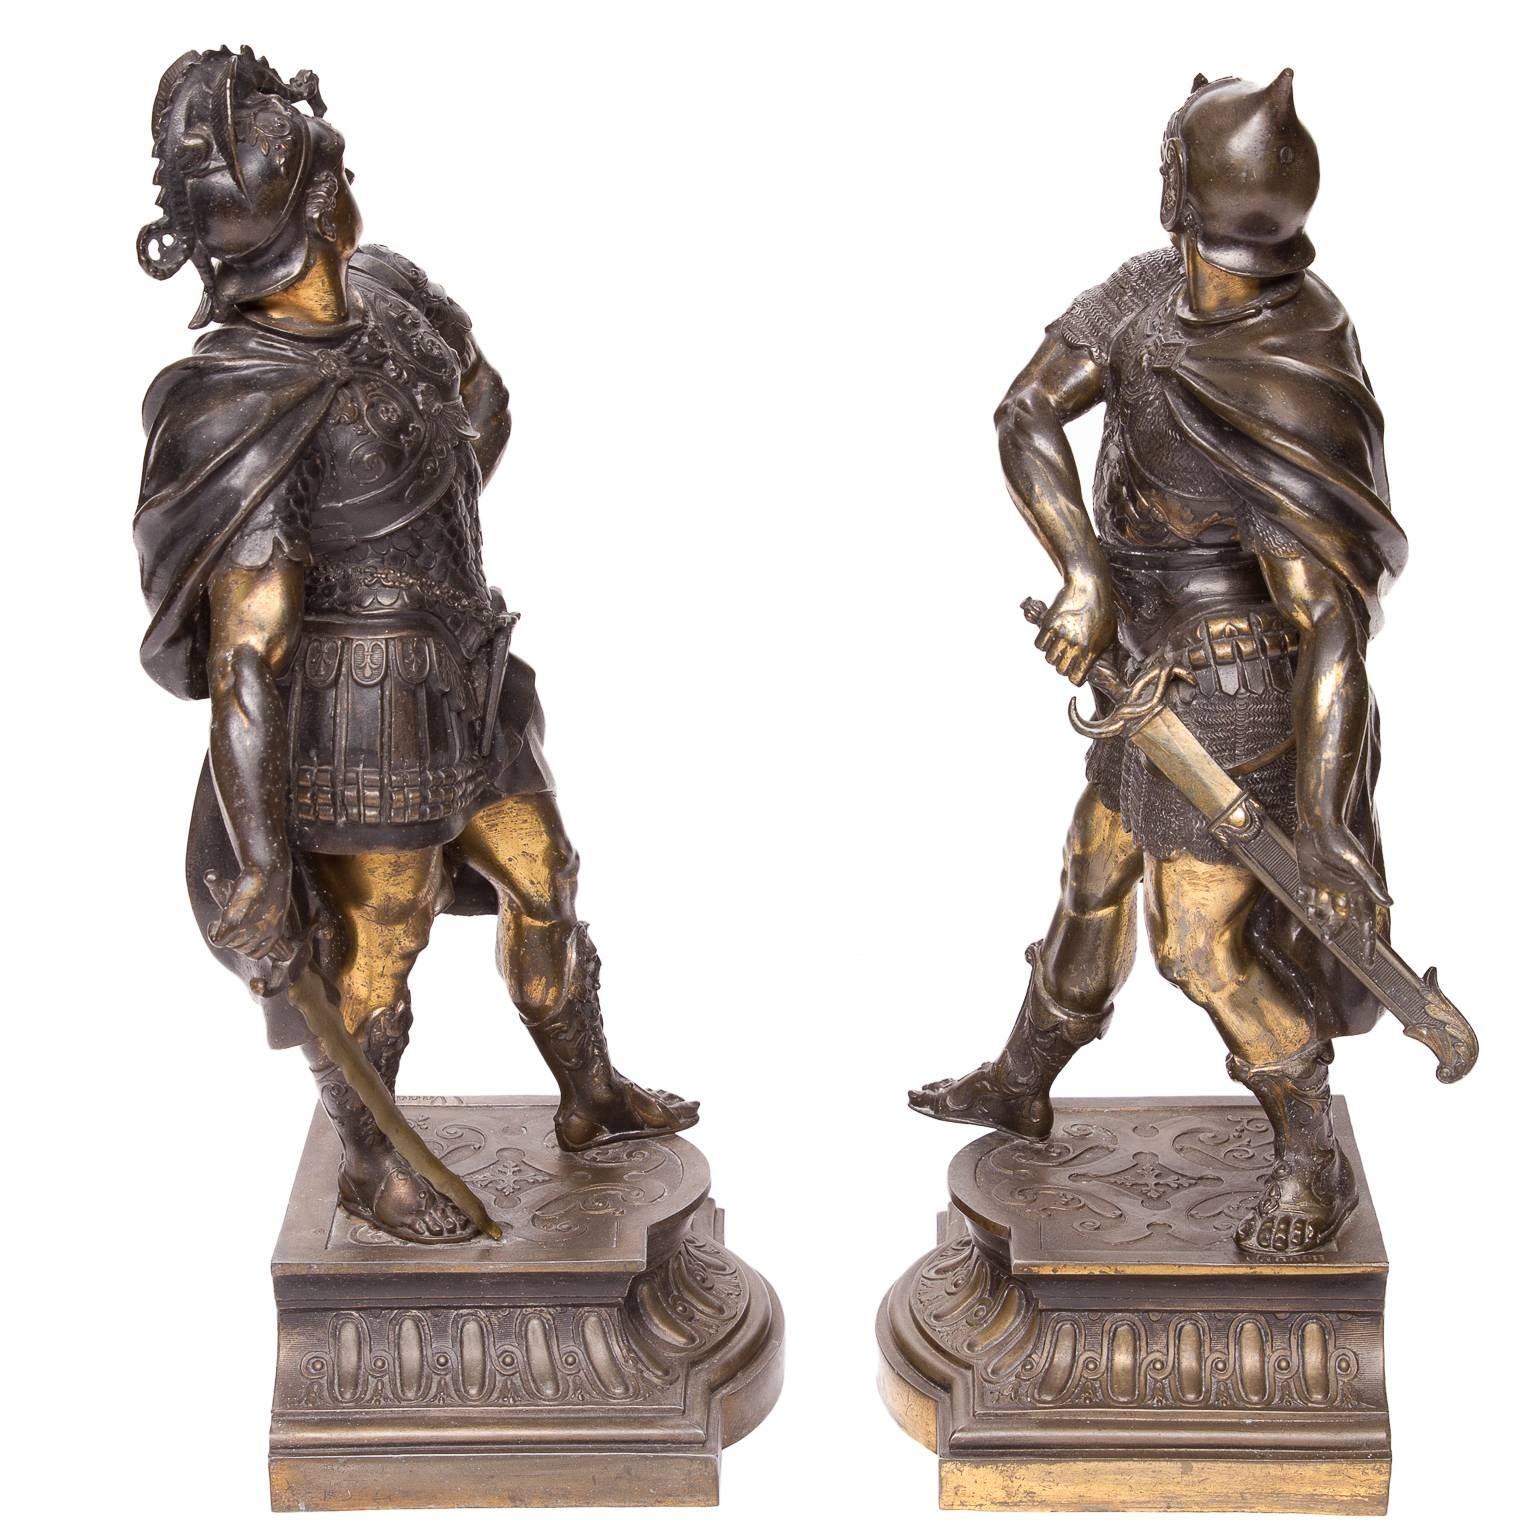 A pair of 19th century signed warrior figures in spelter metal
highly detailed with a wonderful patina. These are stunning and sure to make a statement! 
Signed “Vaaaen.” 
Measures: 11 1/2 W x 24 H.
 